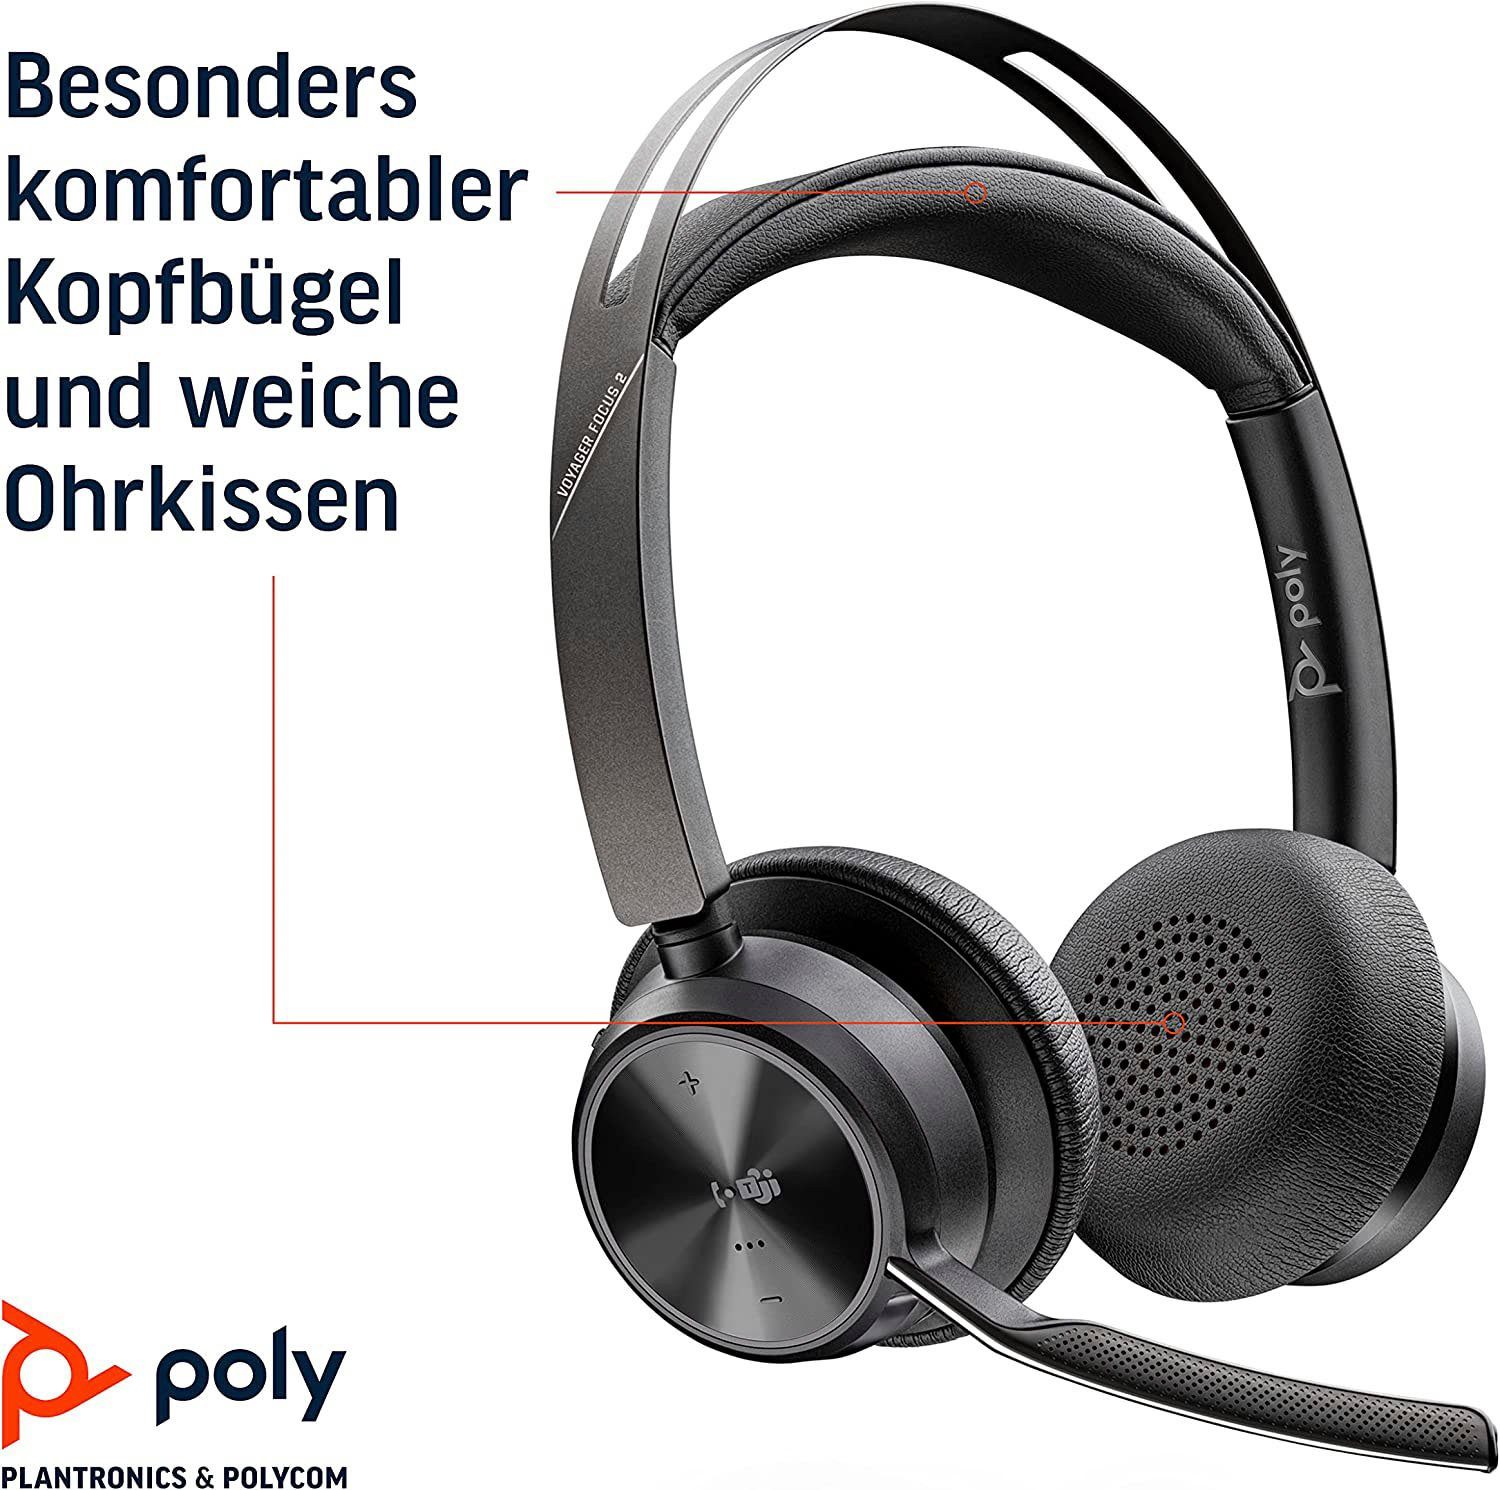 A2DP Bluetooth Audio (ANC), Control Poly (Advanced Profile), Musik, Distribution Remote (Active (Audio Cancelling HSP) und Wireless-Headset Video Bluetooth Profile), Voyager AVRCP für Noise integrierte Steuerung UC 2 Anrufe HFP, Focus